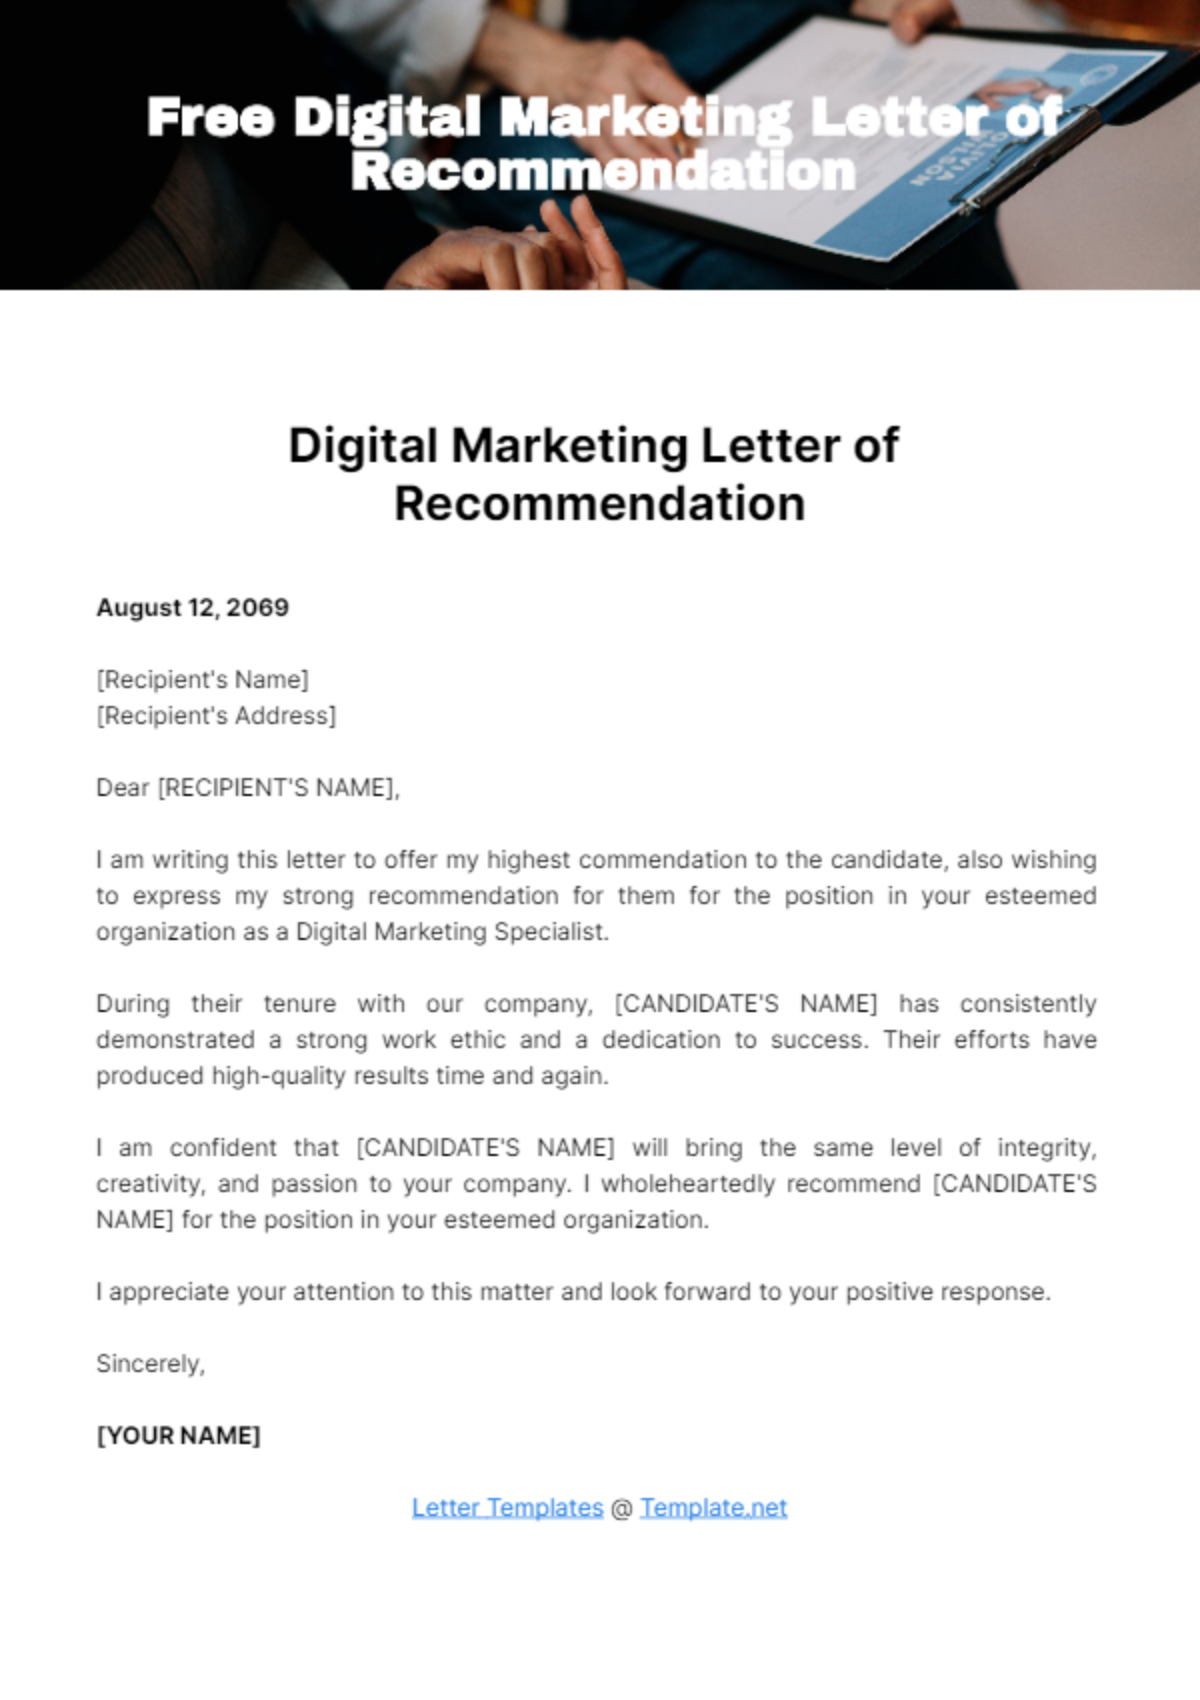 Digital Marketing Letter of Recommendation Template